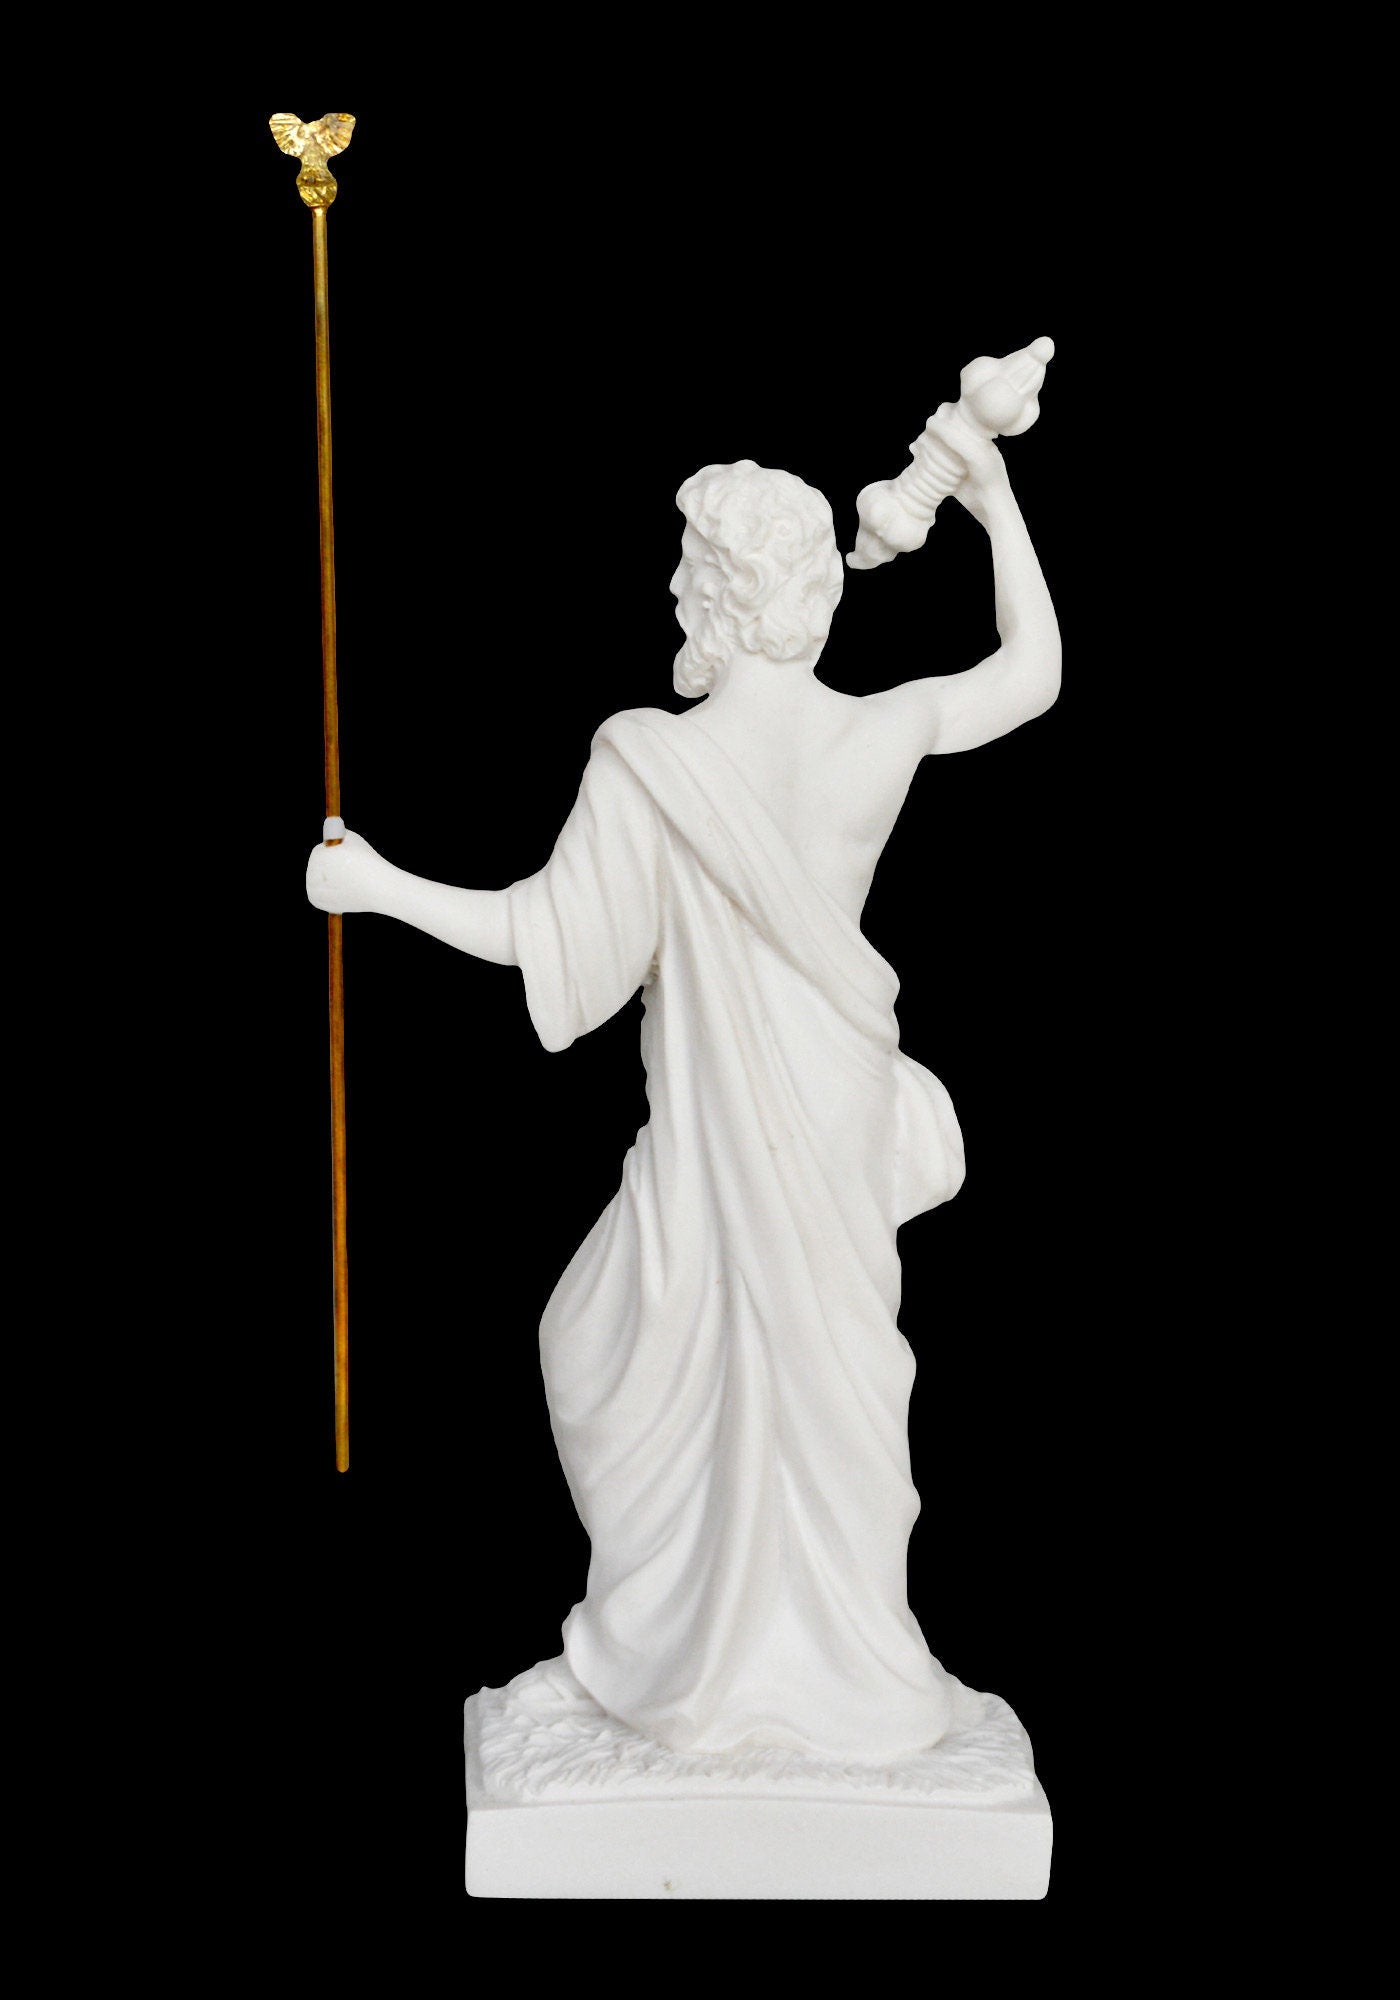 Zeus - King of All Gods, Ruler of Sky and Thunder - Alabaster Statue